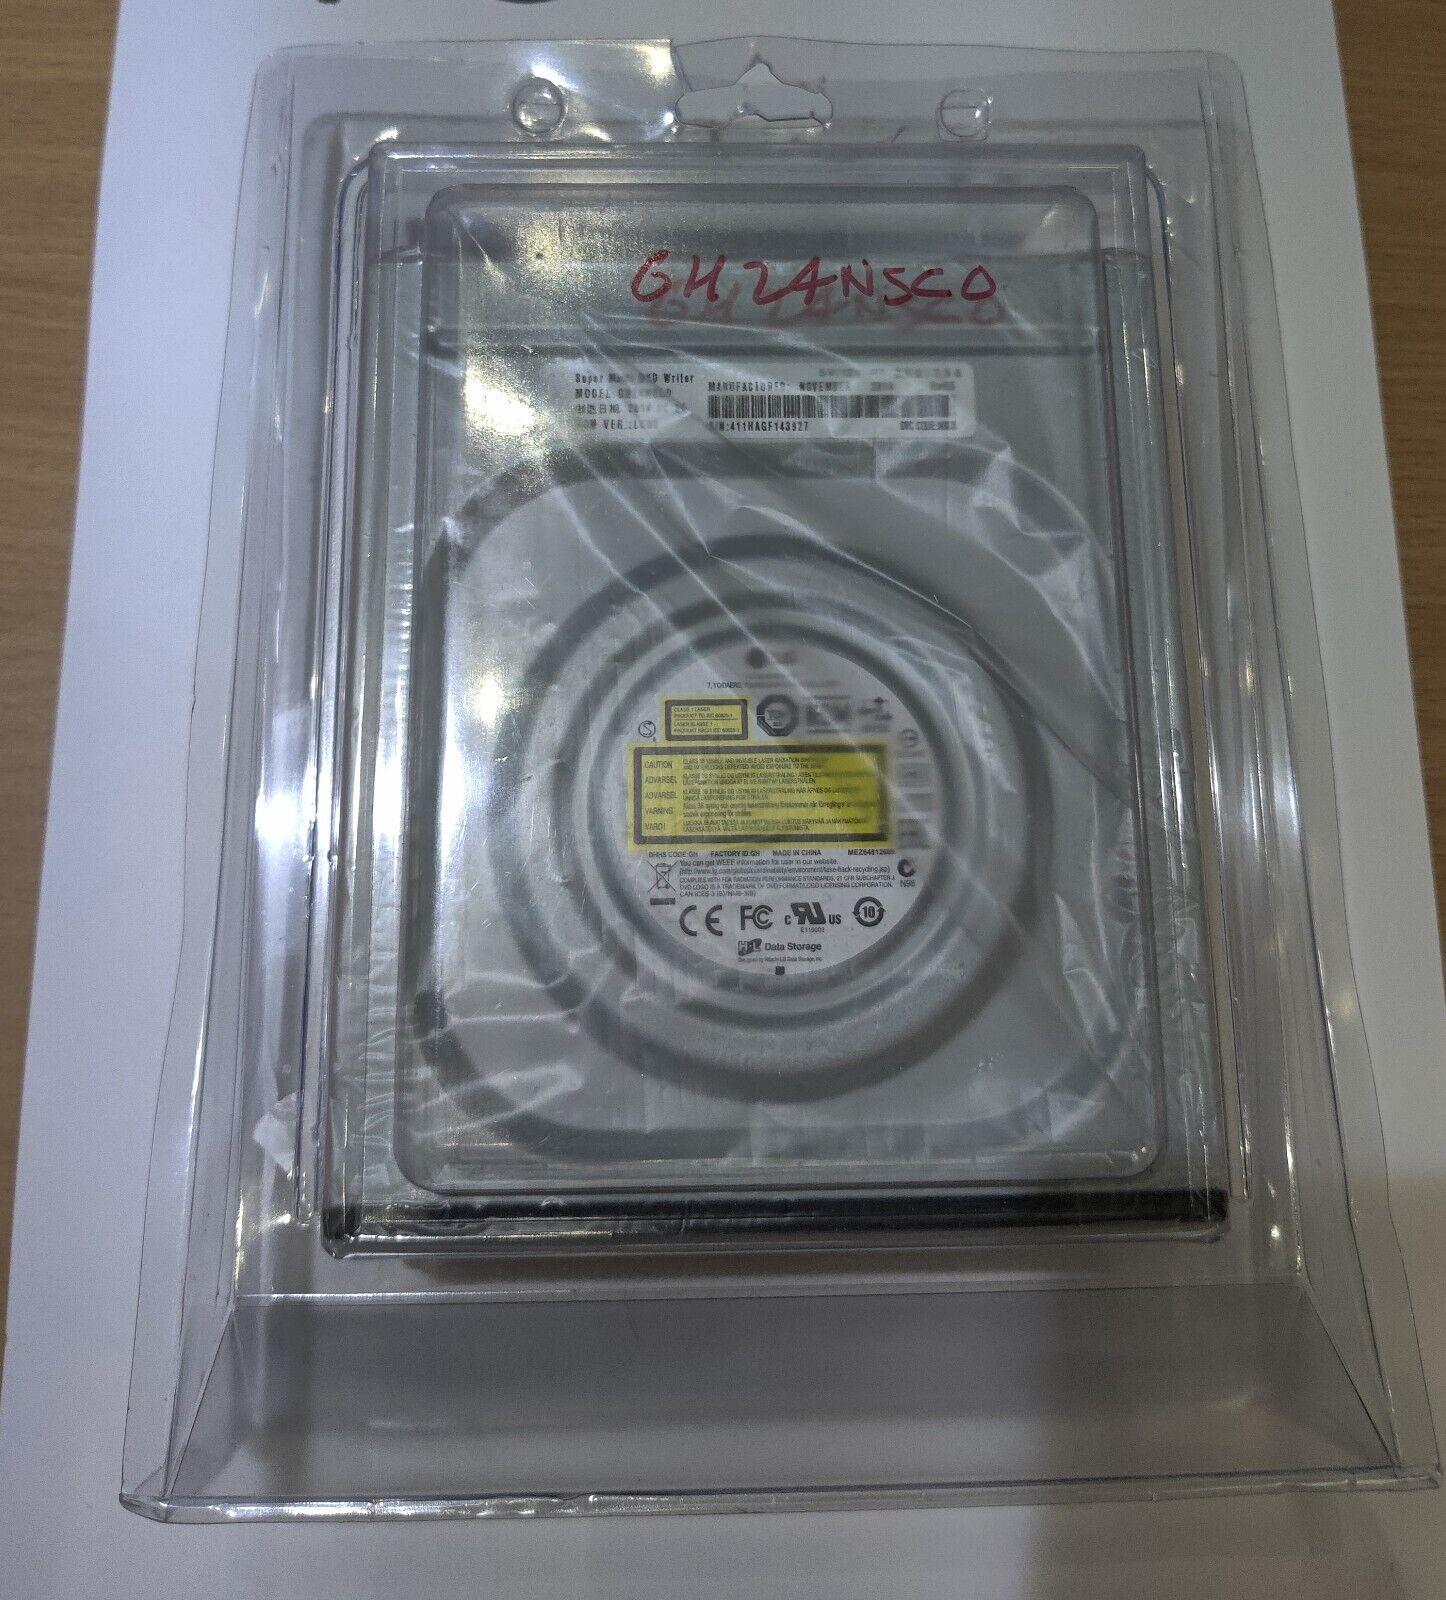 LG Internal - GH24NSC0B - 24x Super Multi with M-DISC Support SATA - NEW SEALED